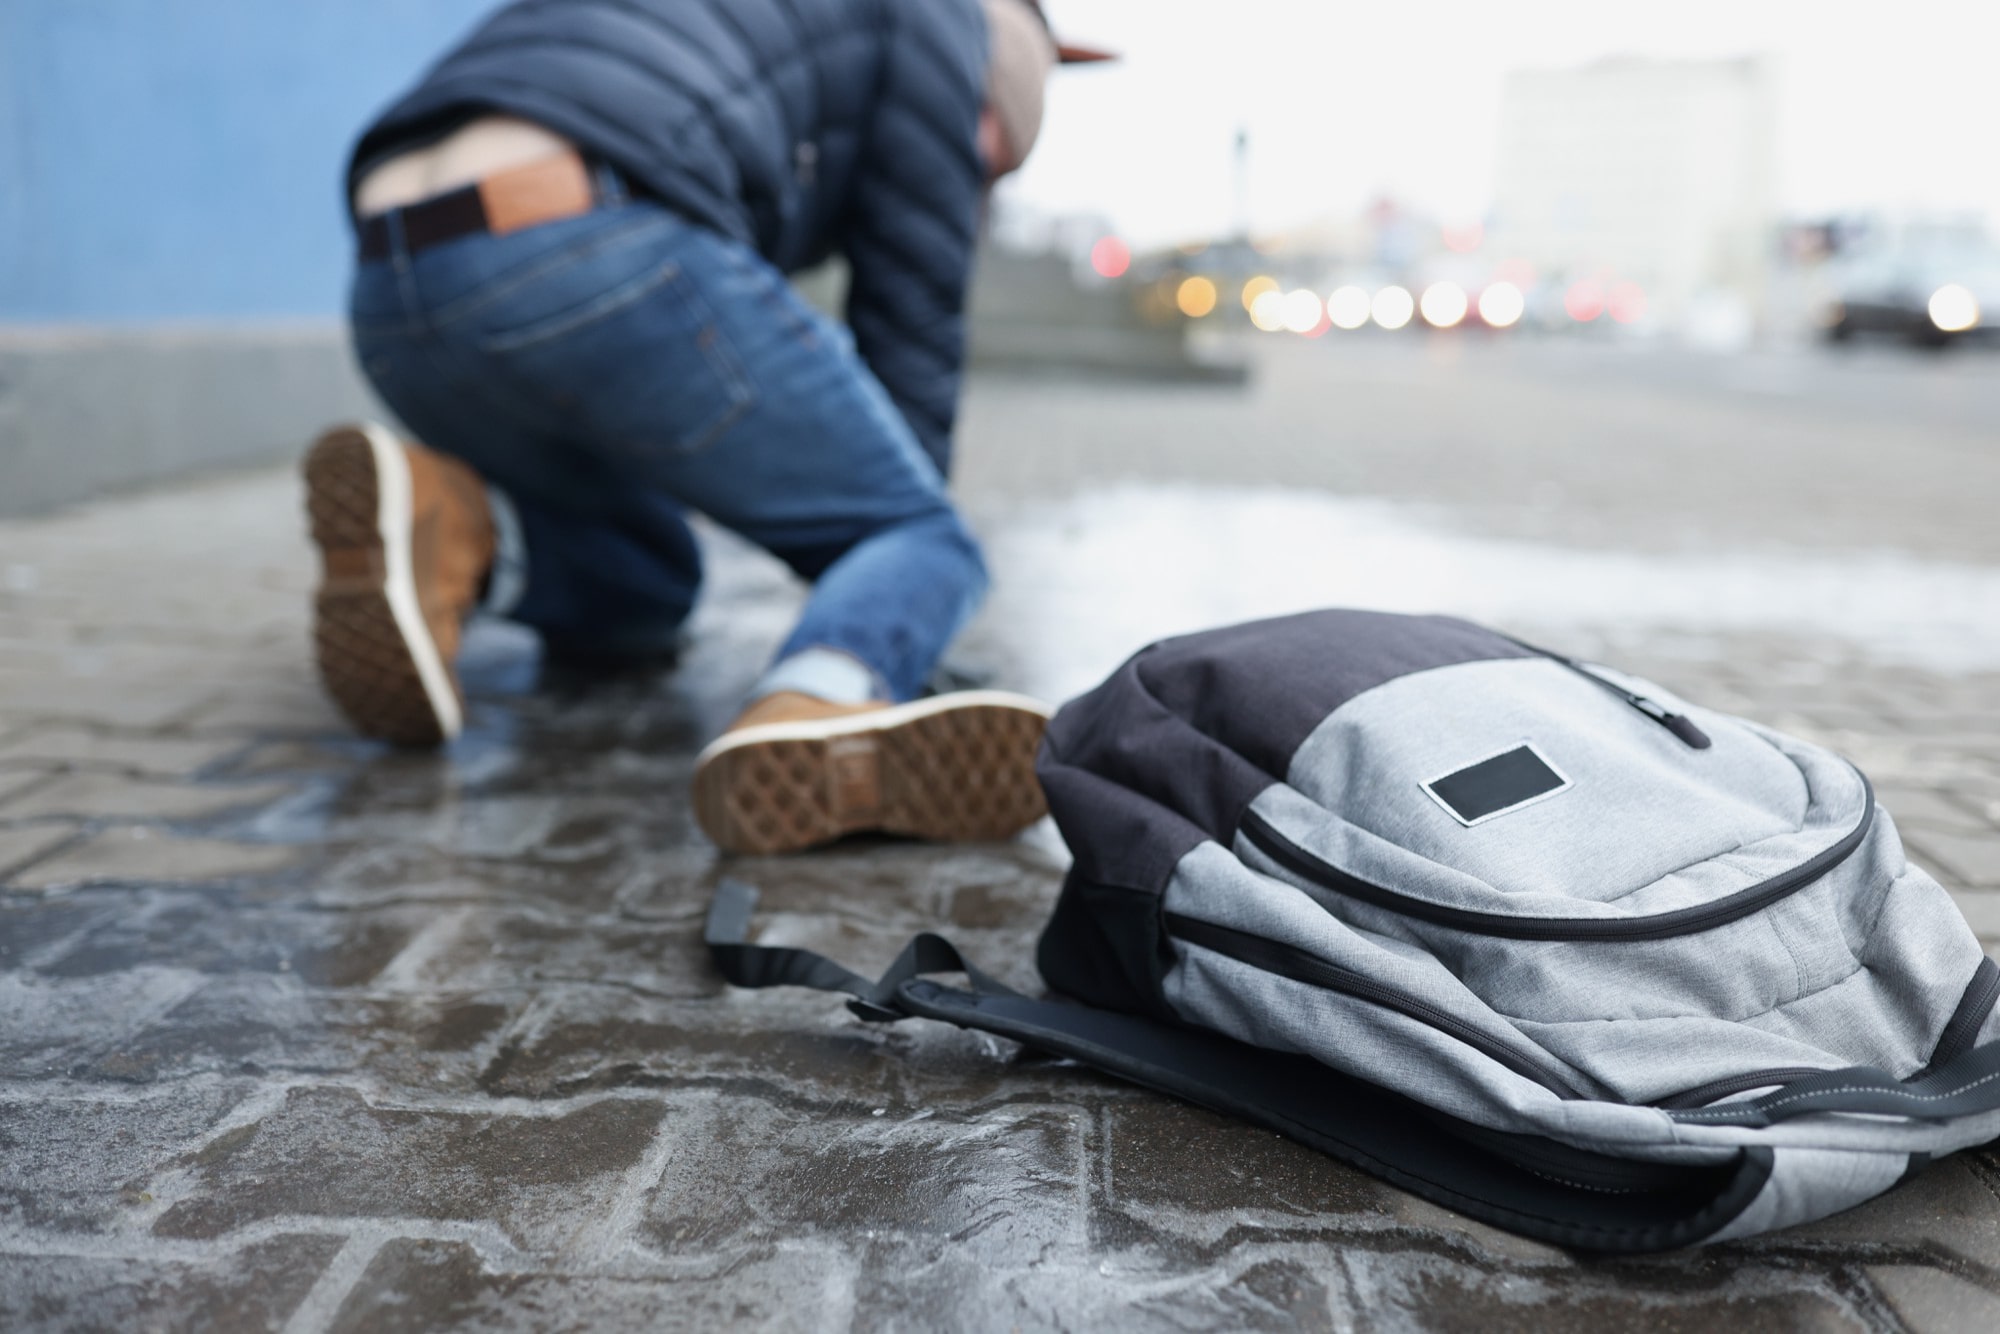 Slip & Fall Accidents on Icy Sidewalks: Who Is At-Fault?